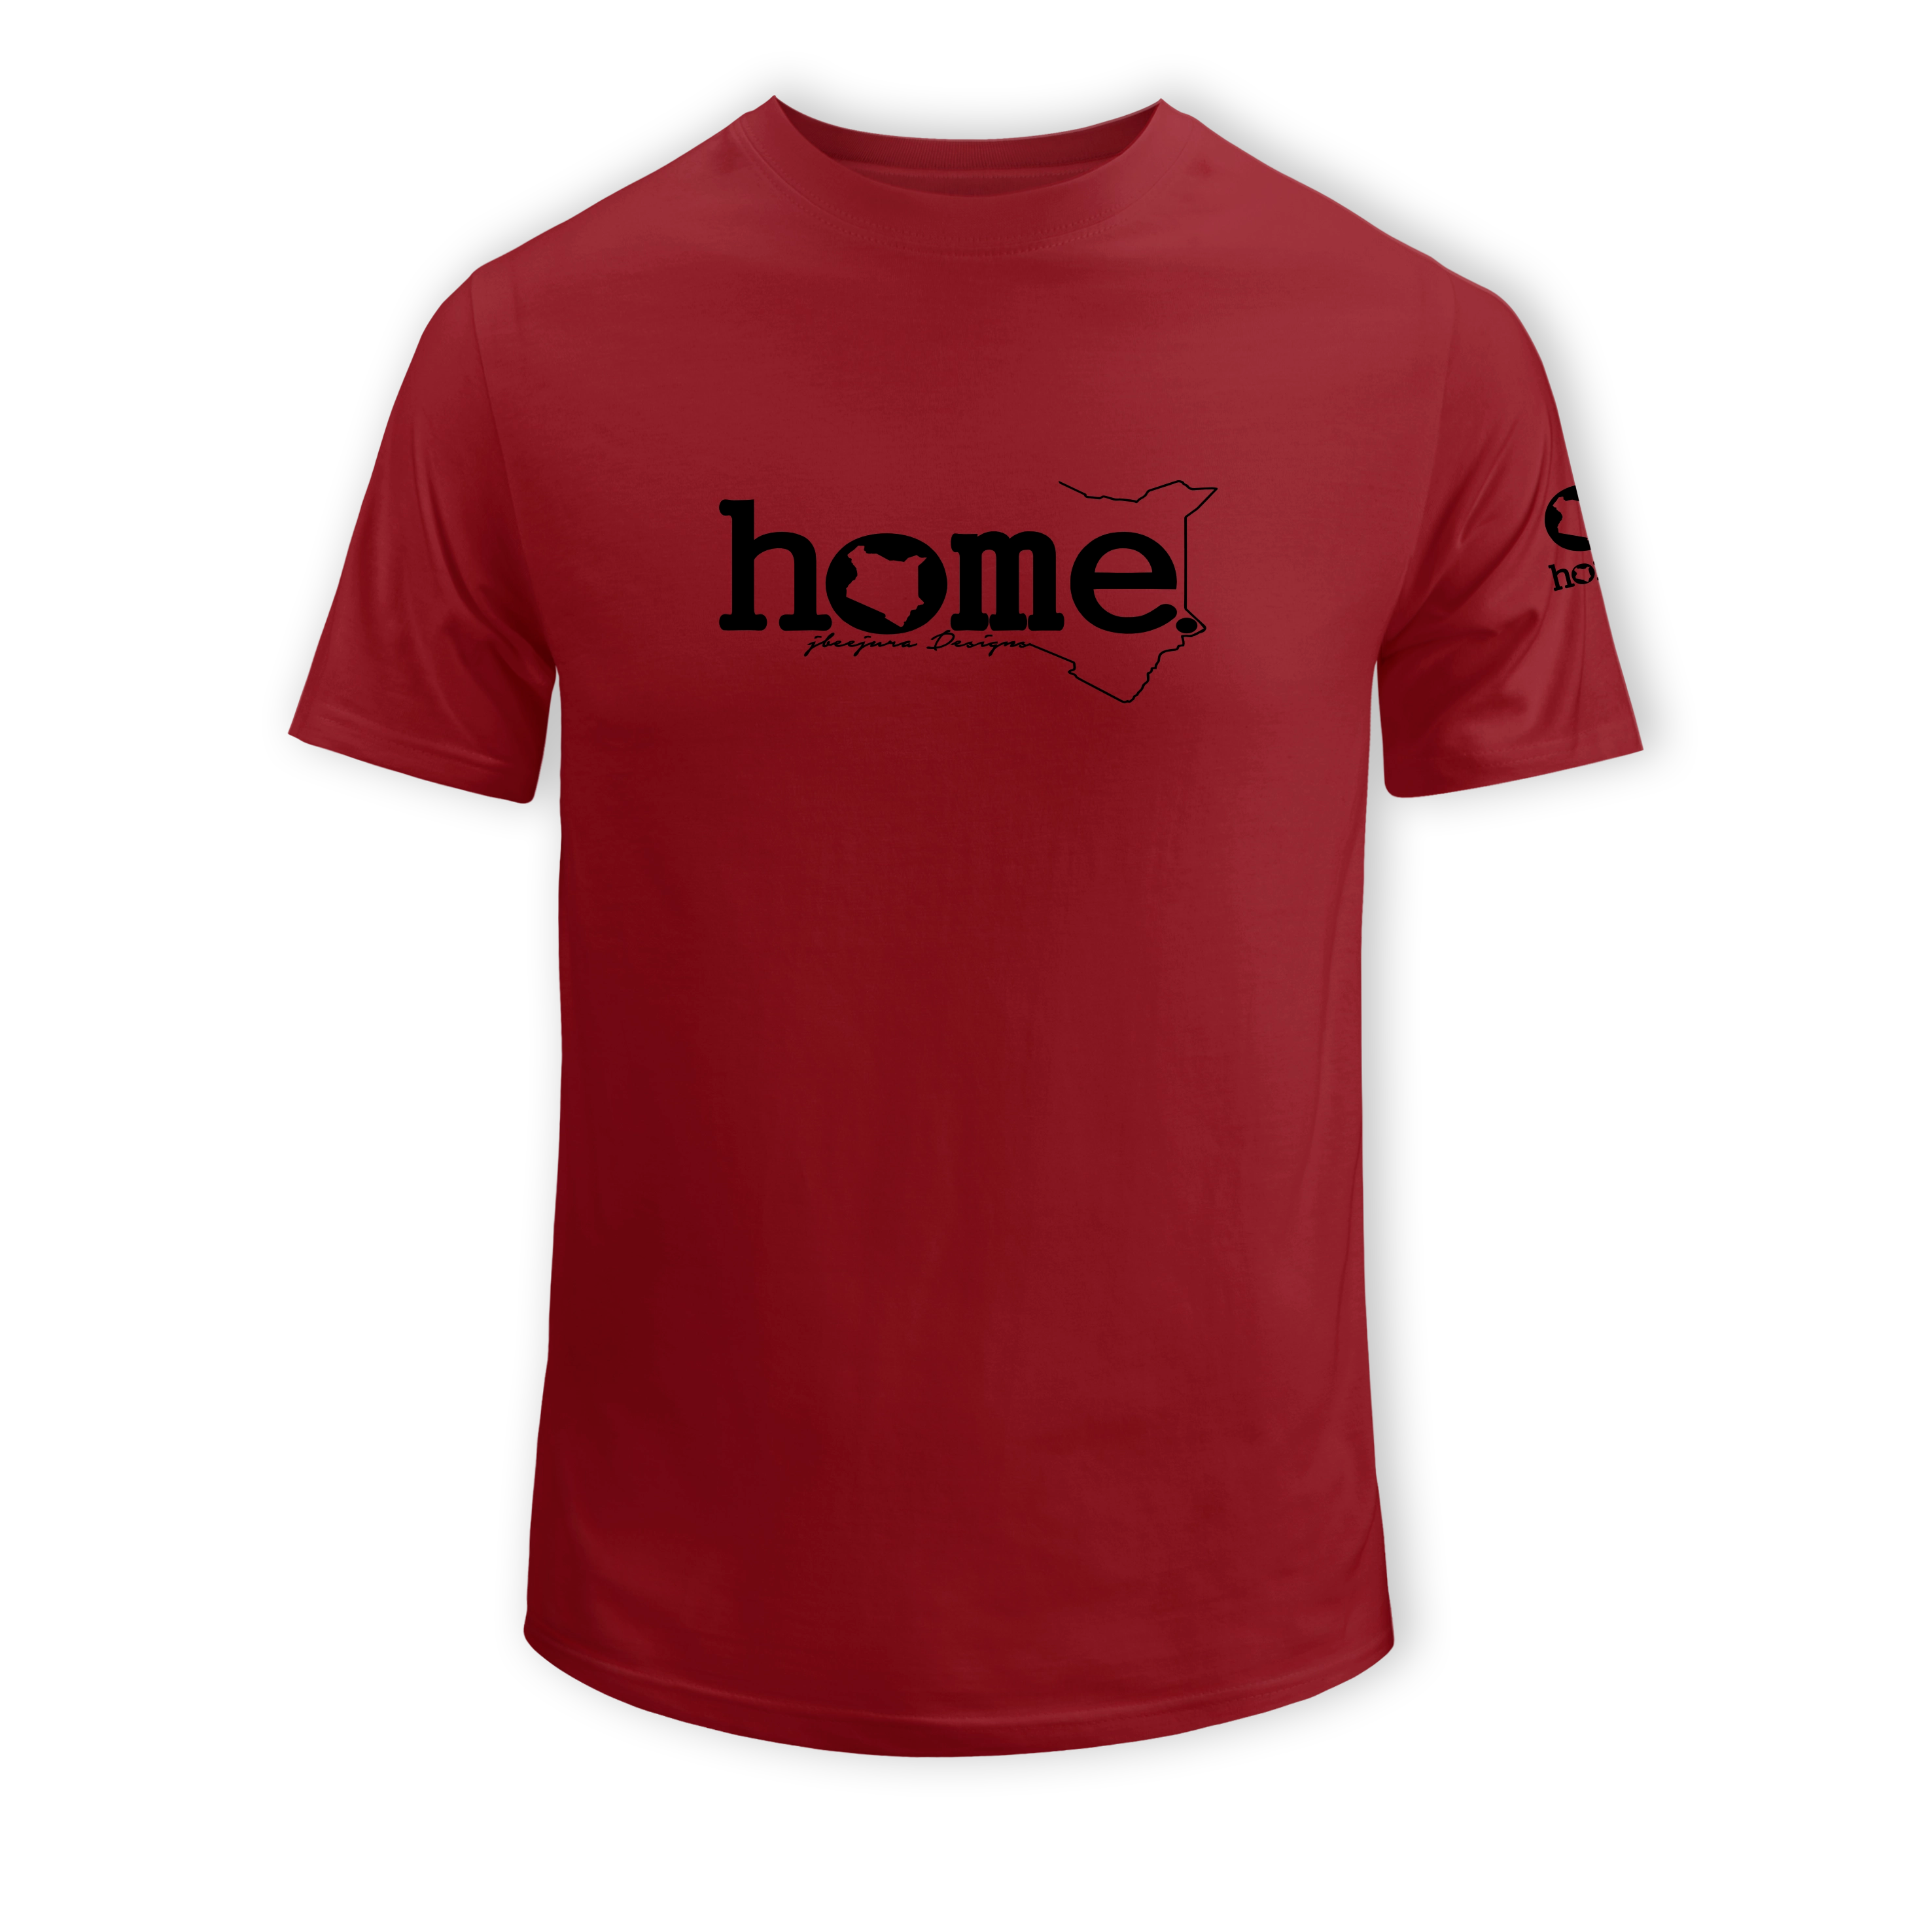 home_254 KIDS SHORT-SLEEVED MAROON RED T-SHIRT WITH A BLACK CLASSIC WORDS PRINT – COTTON PLUS FABRIC